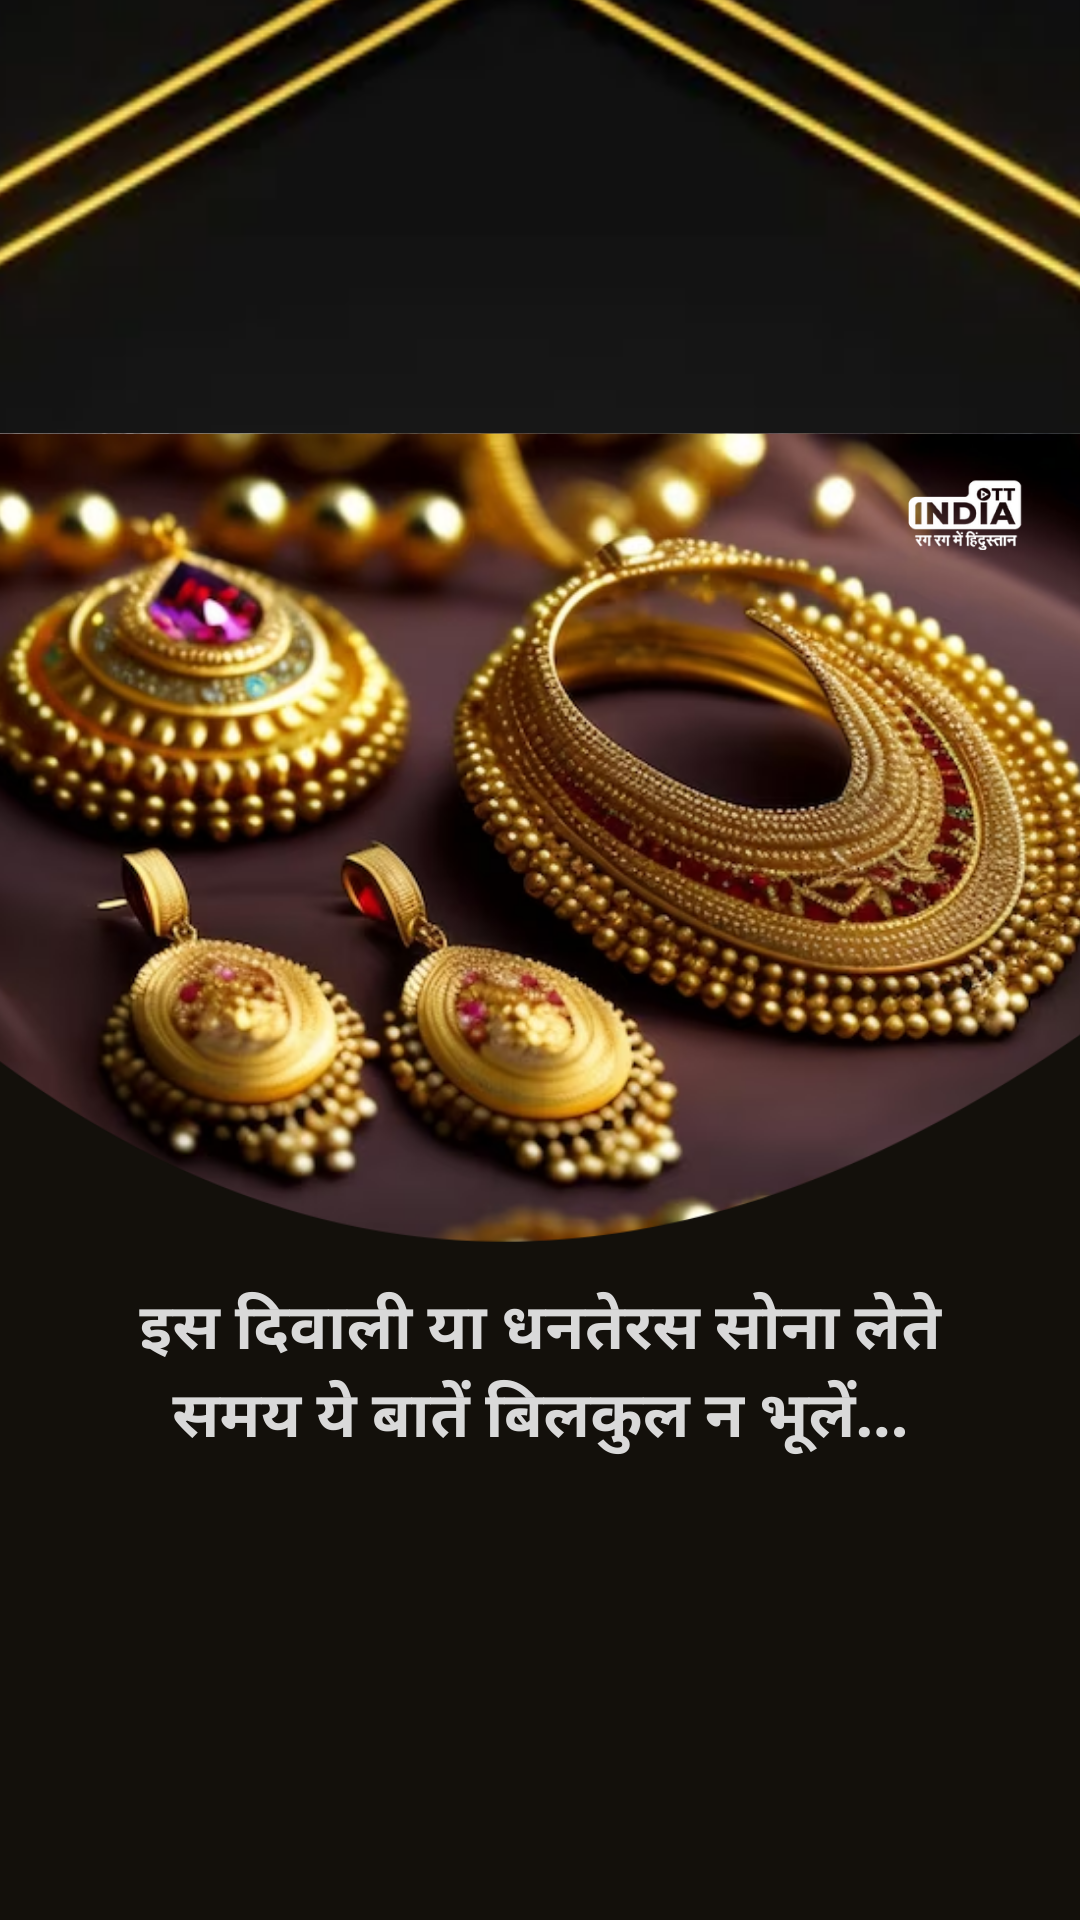 Gold Purchase: If you are also thinking of buying gold this Diwali or Dhanteras, then do not forget these things...